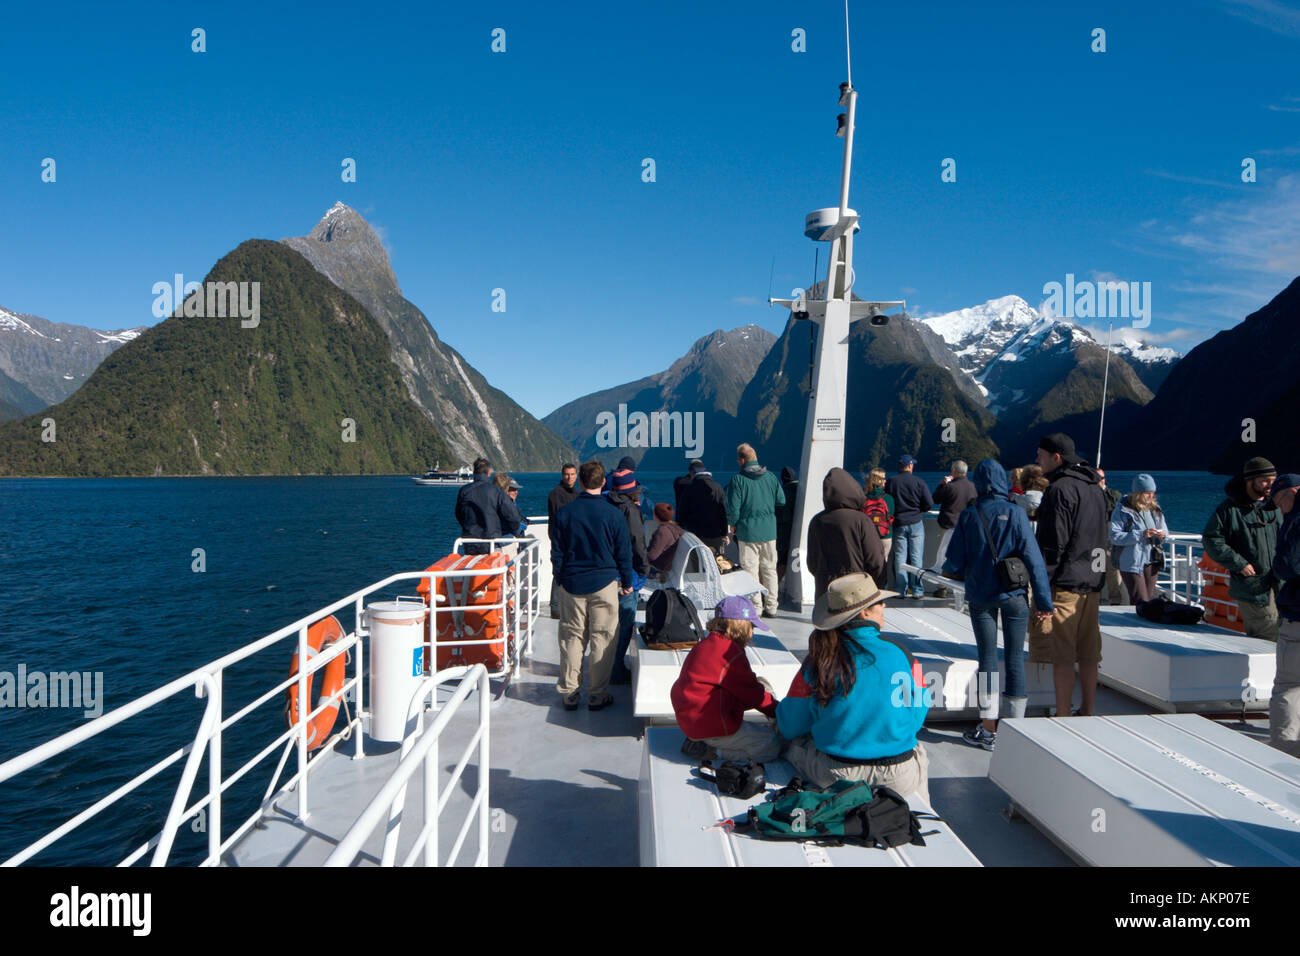 Tourists on the deck of a cruise boat with Mitre Peak behind, Milford Sound, Fiordland National Park, South Island, New Zealand Stock Photo